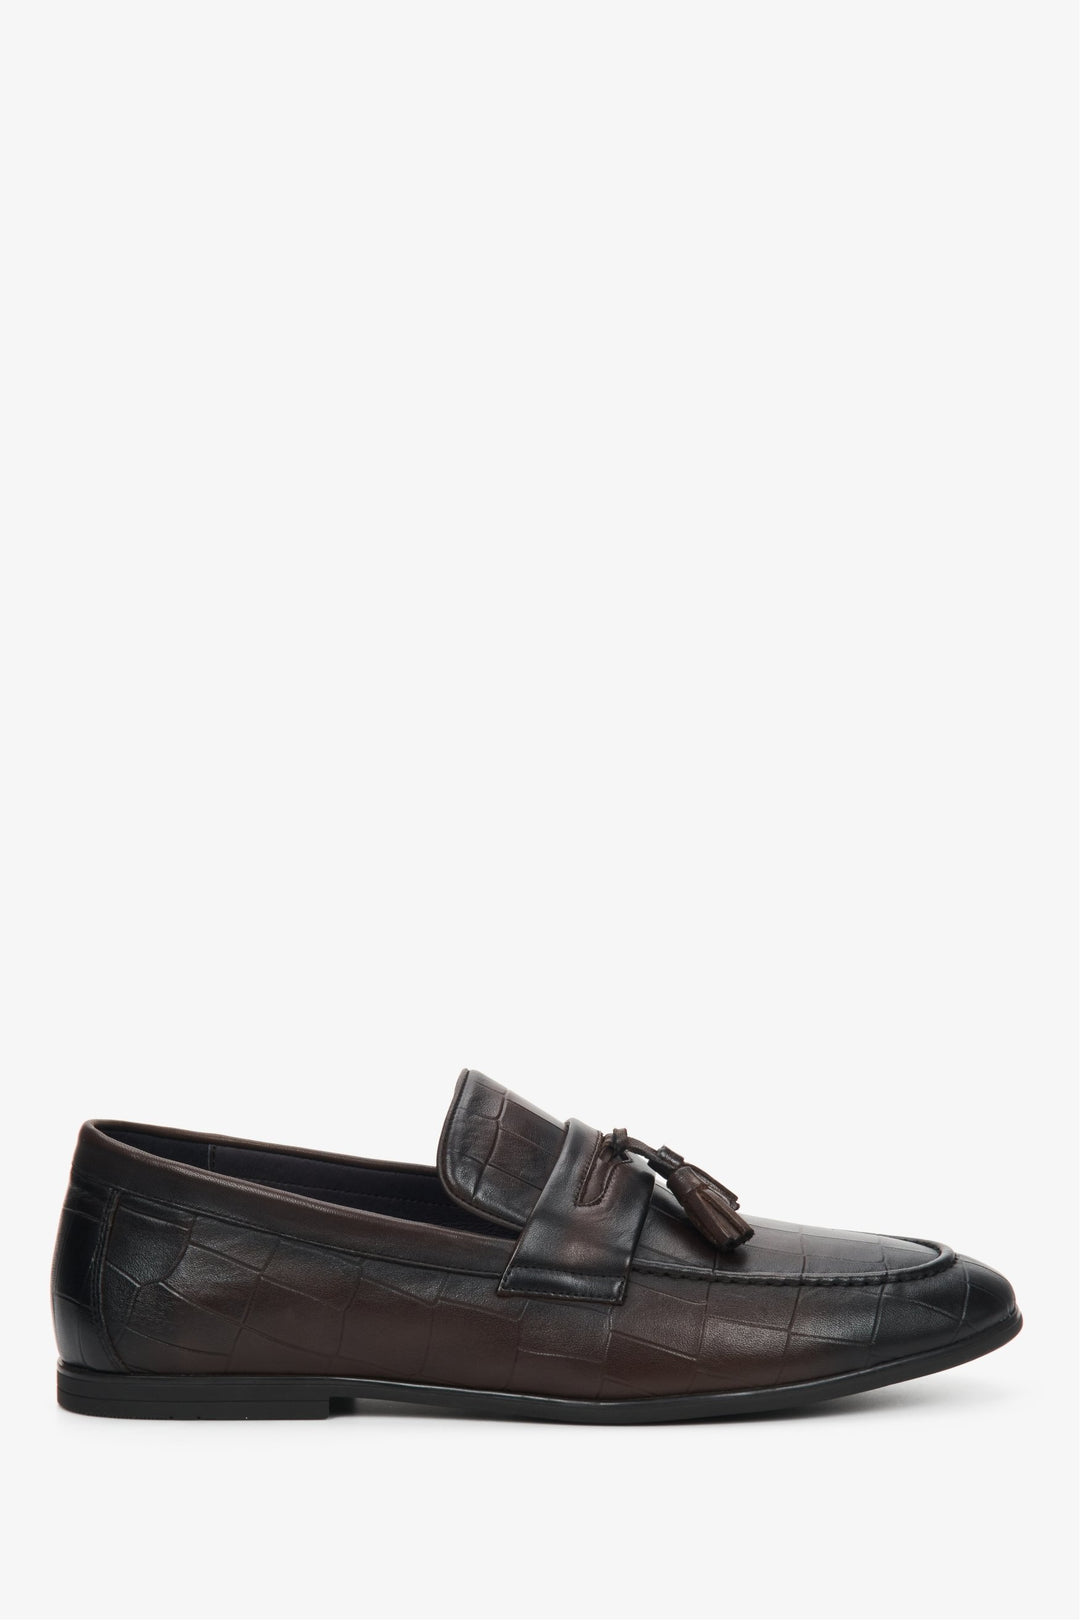 Men's dark brown loafers made of genuine leather - close-up of the shoe profile by Estro.